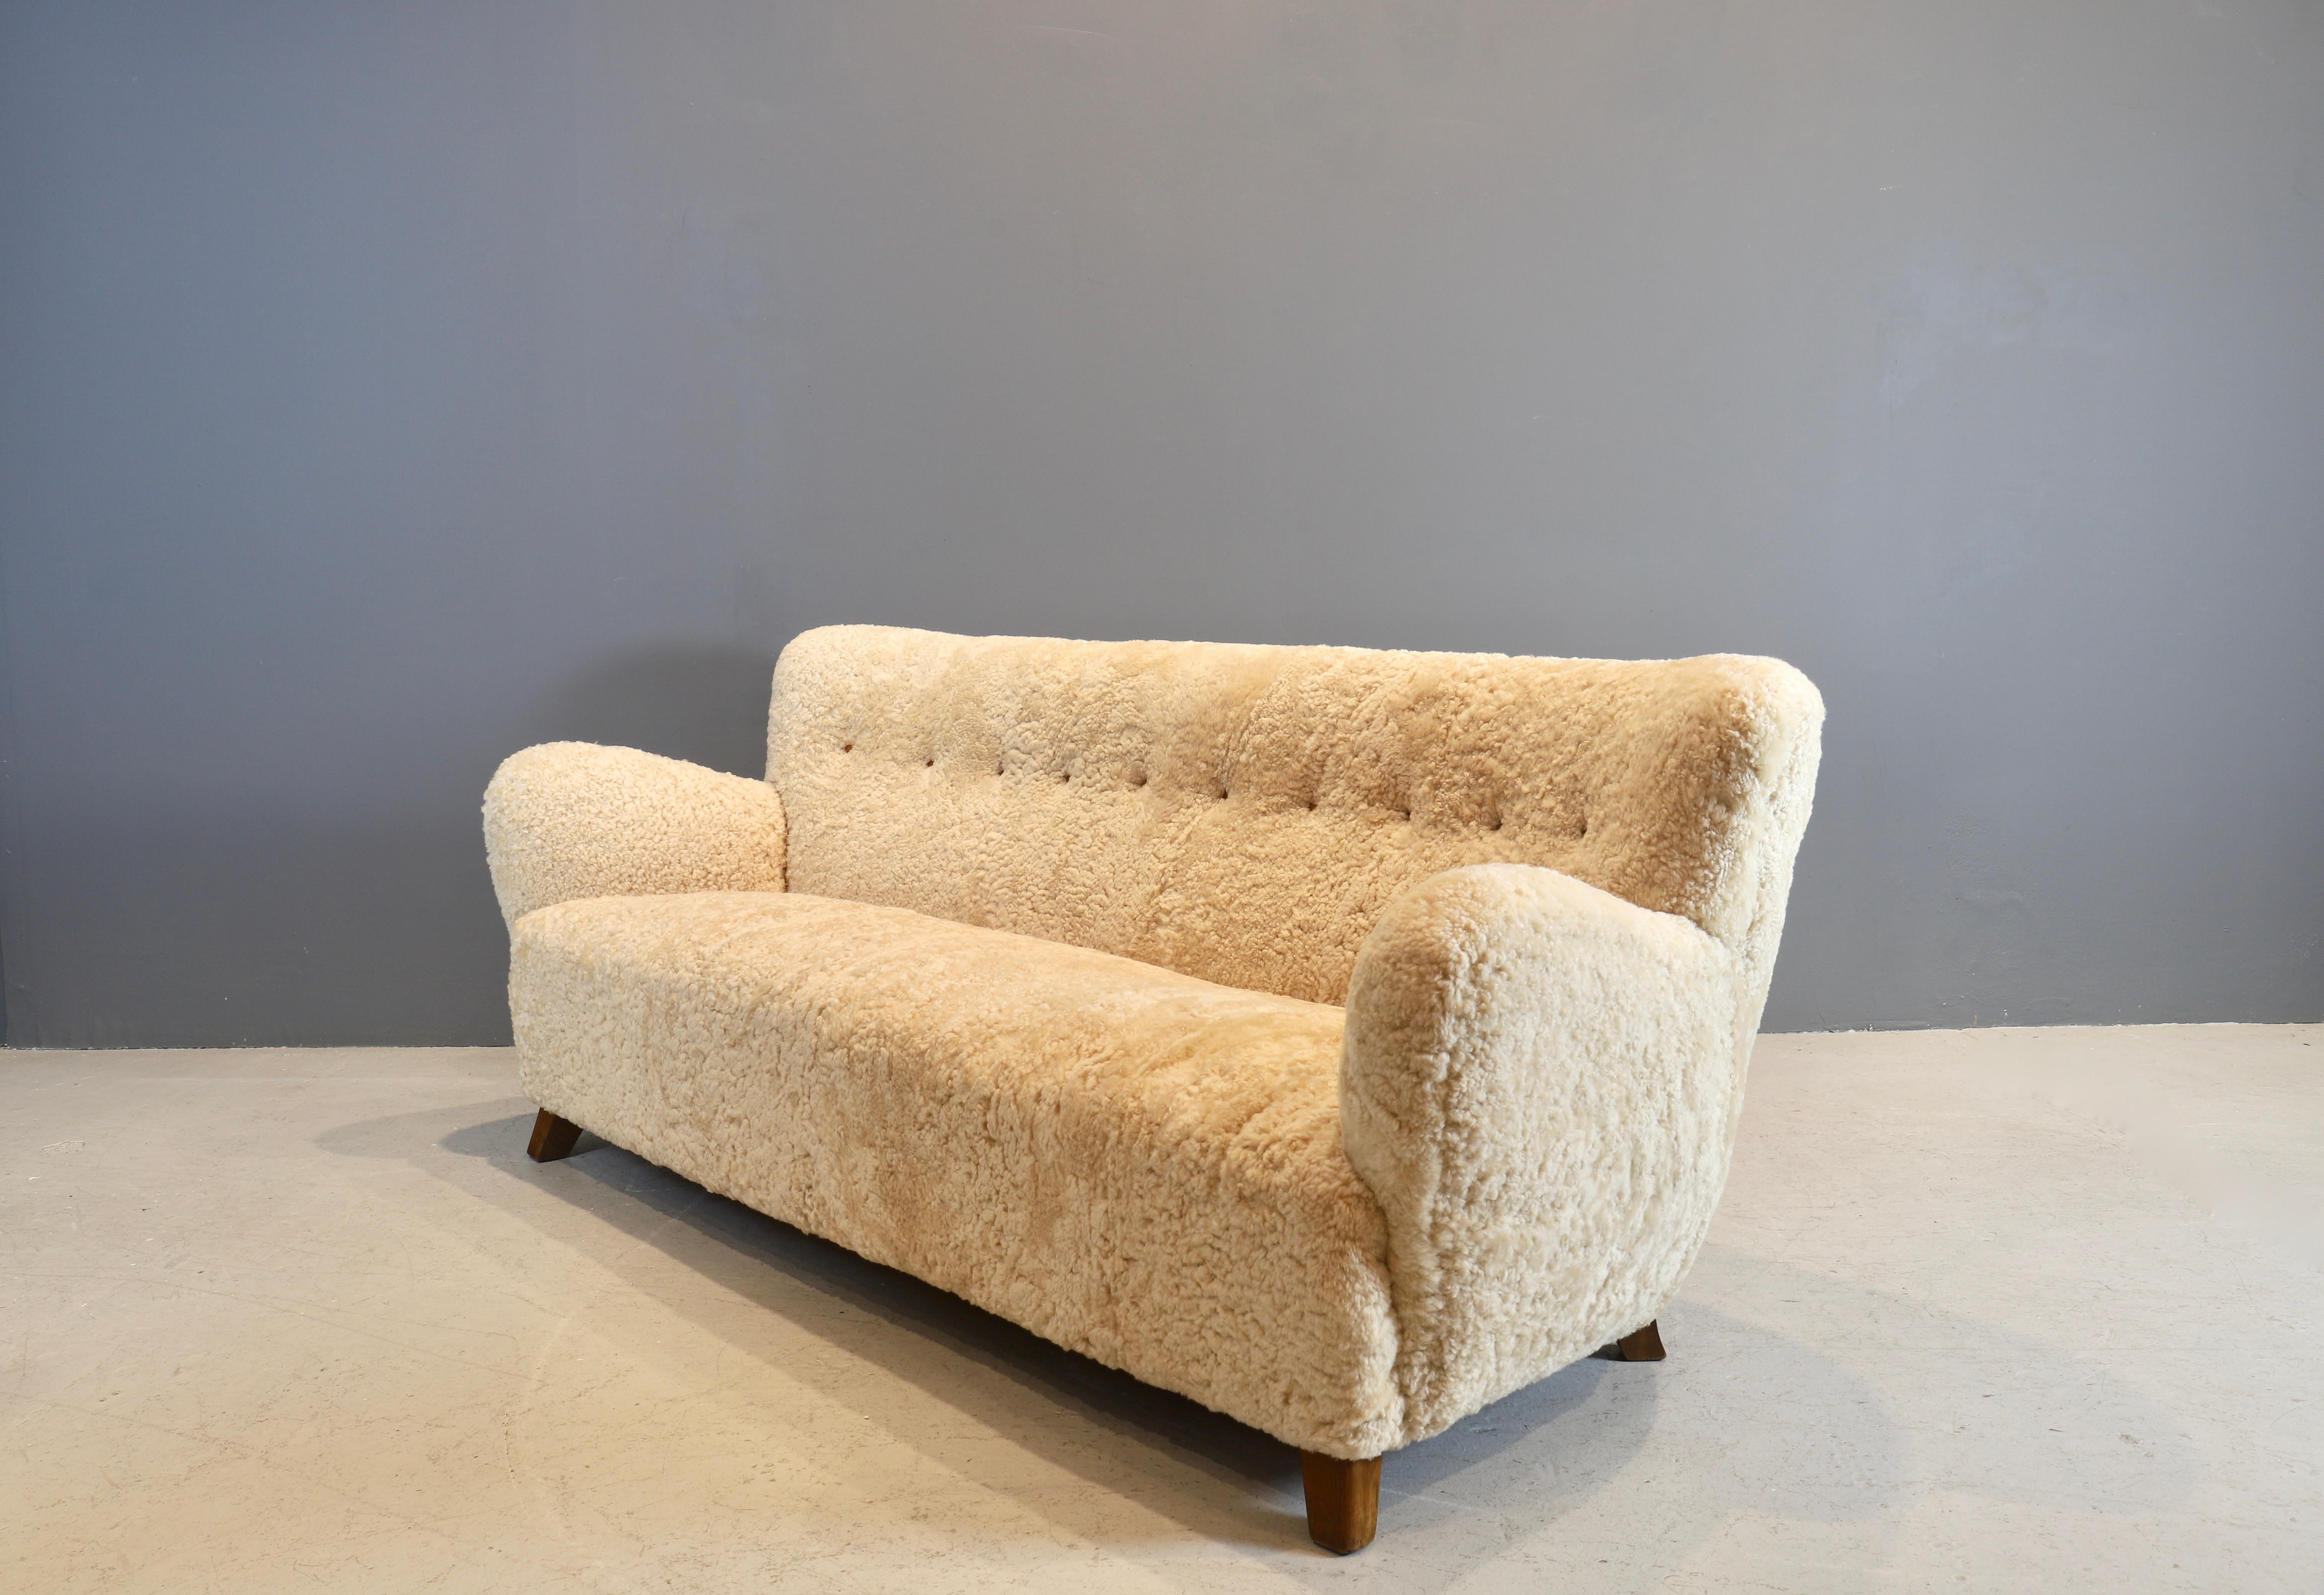 Vintage Fritz Hansen couch, circa 1940s masterfully reupholstered in light beige shearling with leather buttons. Oak legs have been cleaned and oiled.
This couch is available to view in the gallery.